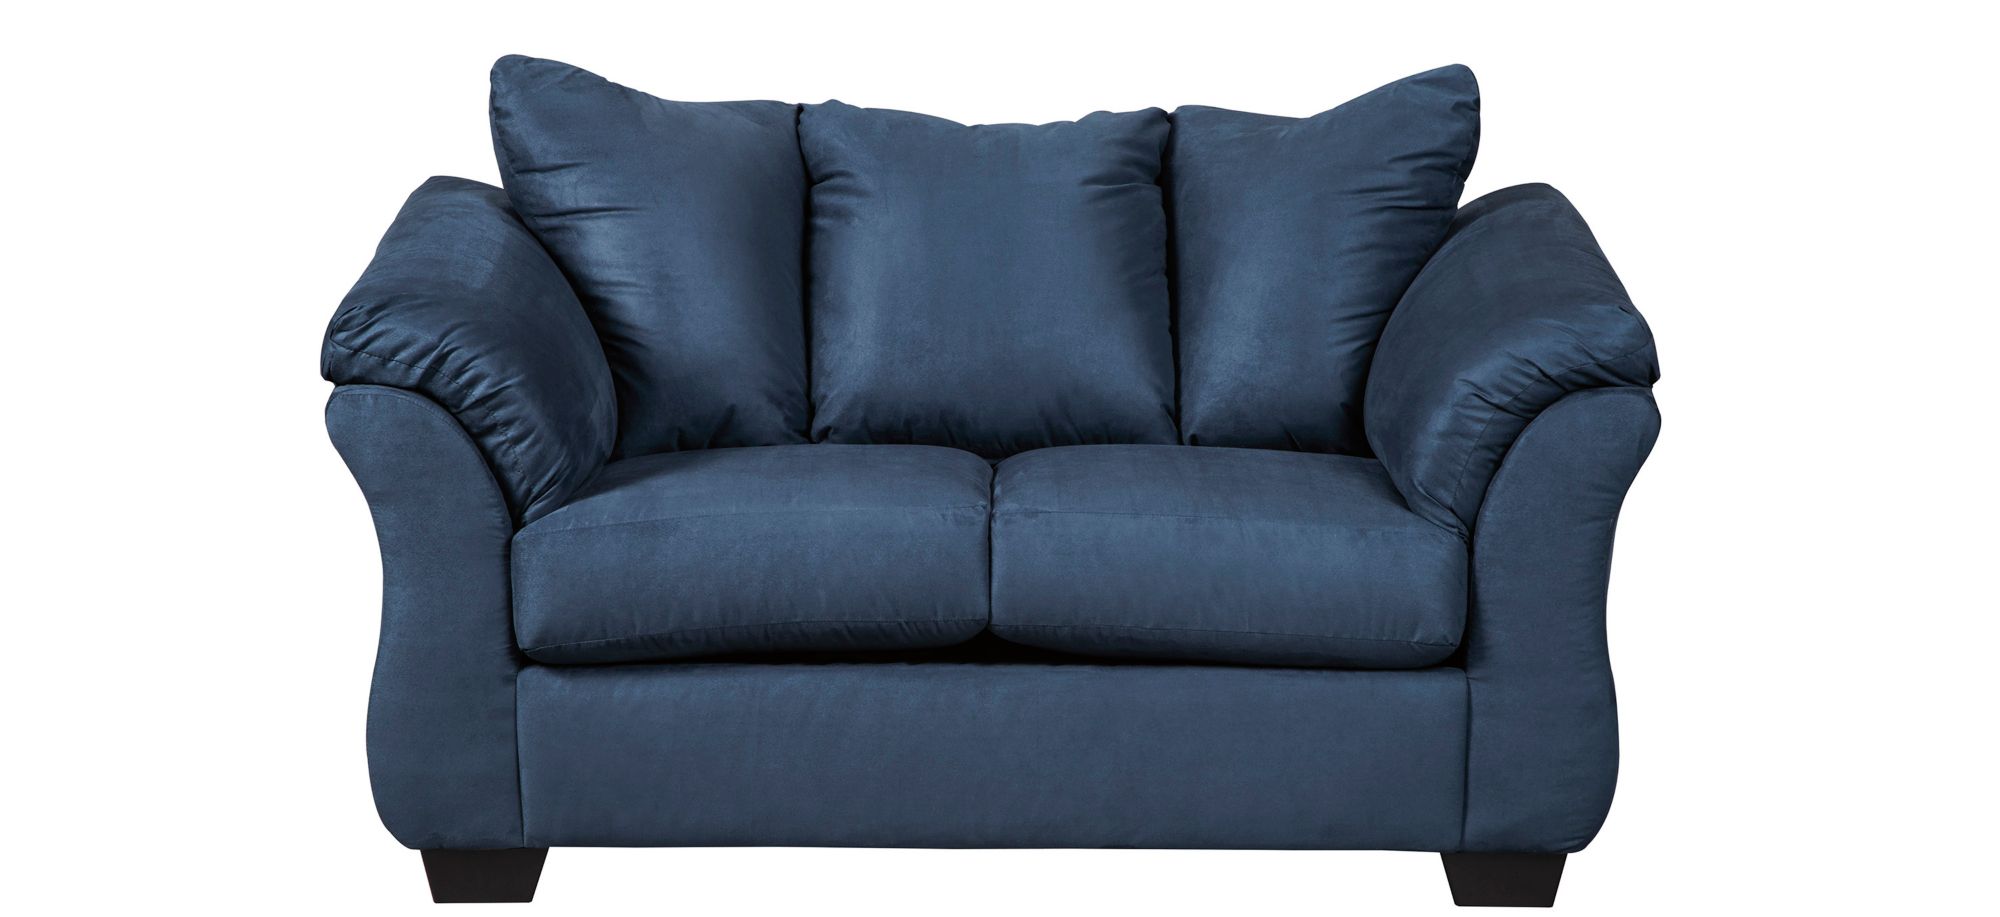 Whitman Loveseat in Blue by Ashley Furniture